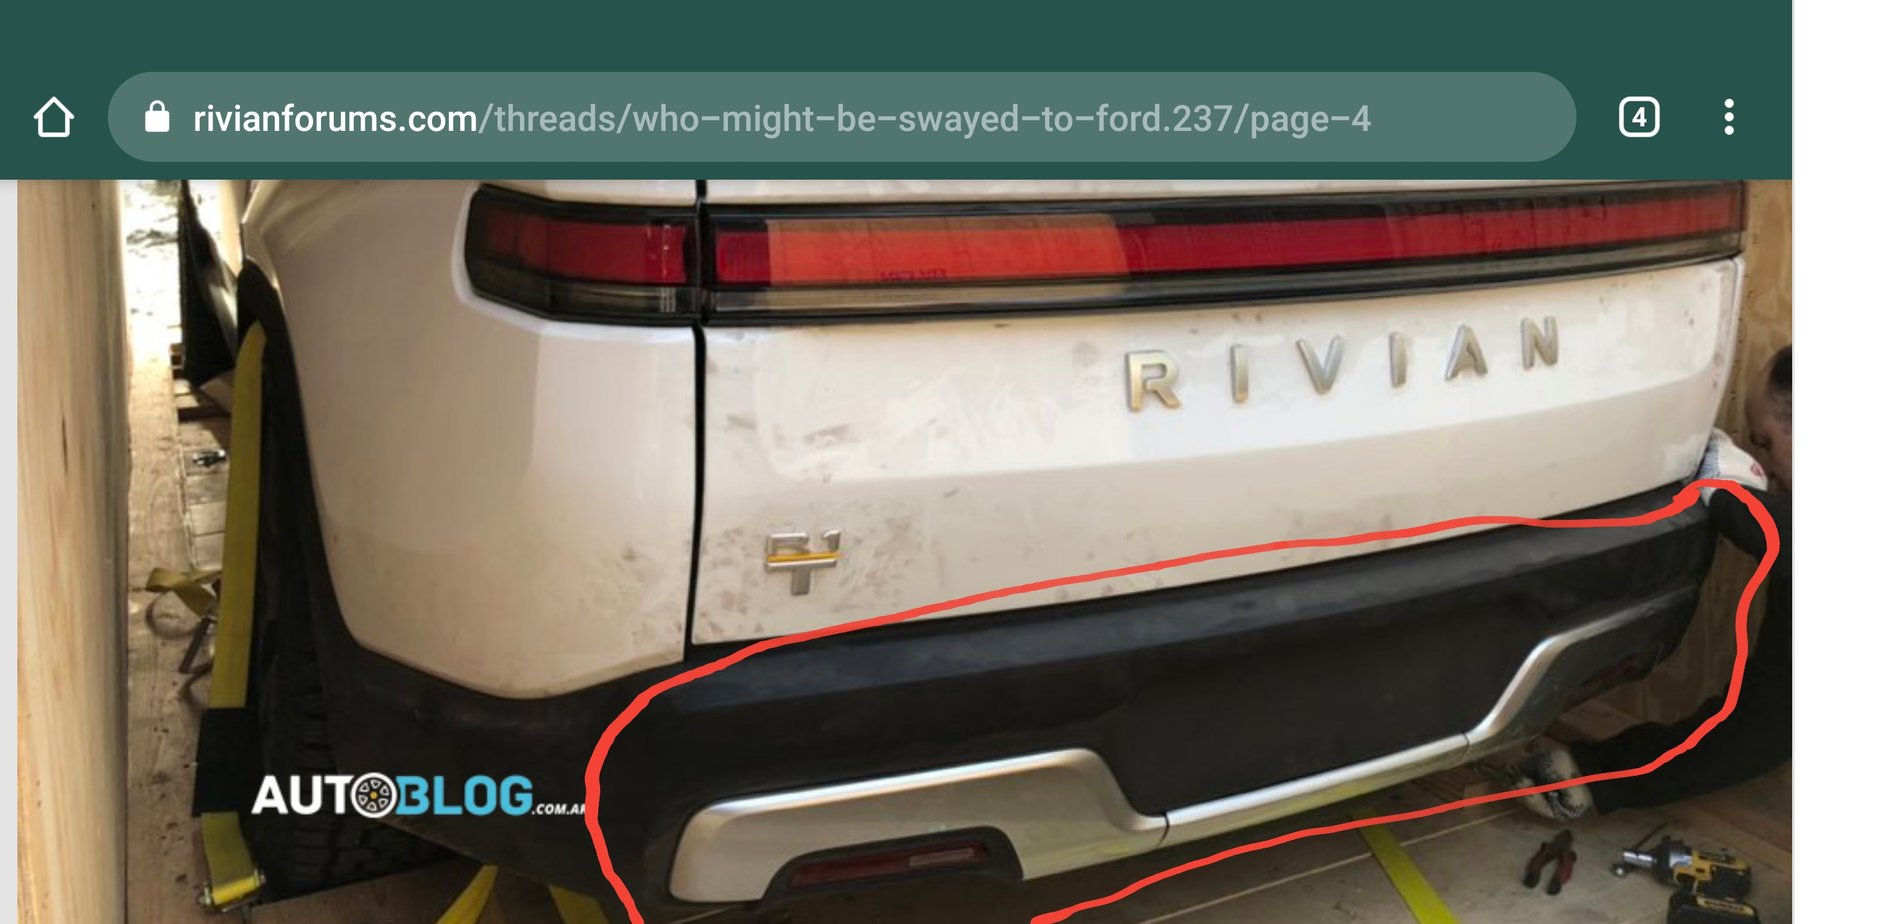 Rivian R1T R1S Who might be swayed to Ford? Screenshot_20190922-103759_Chrome